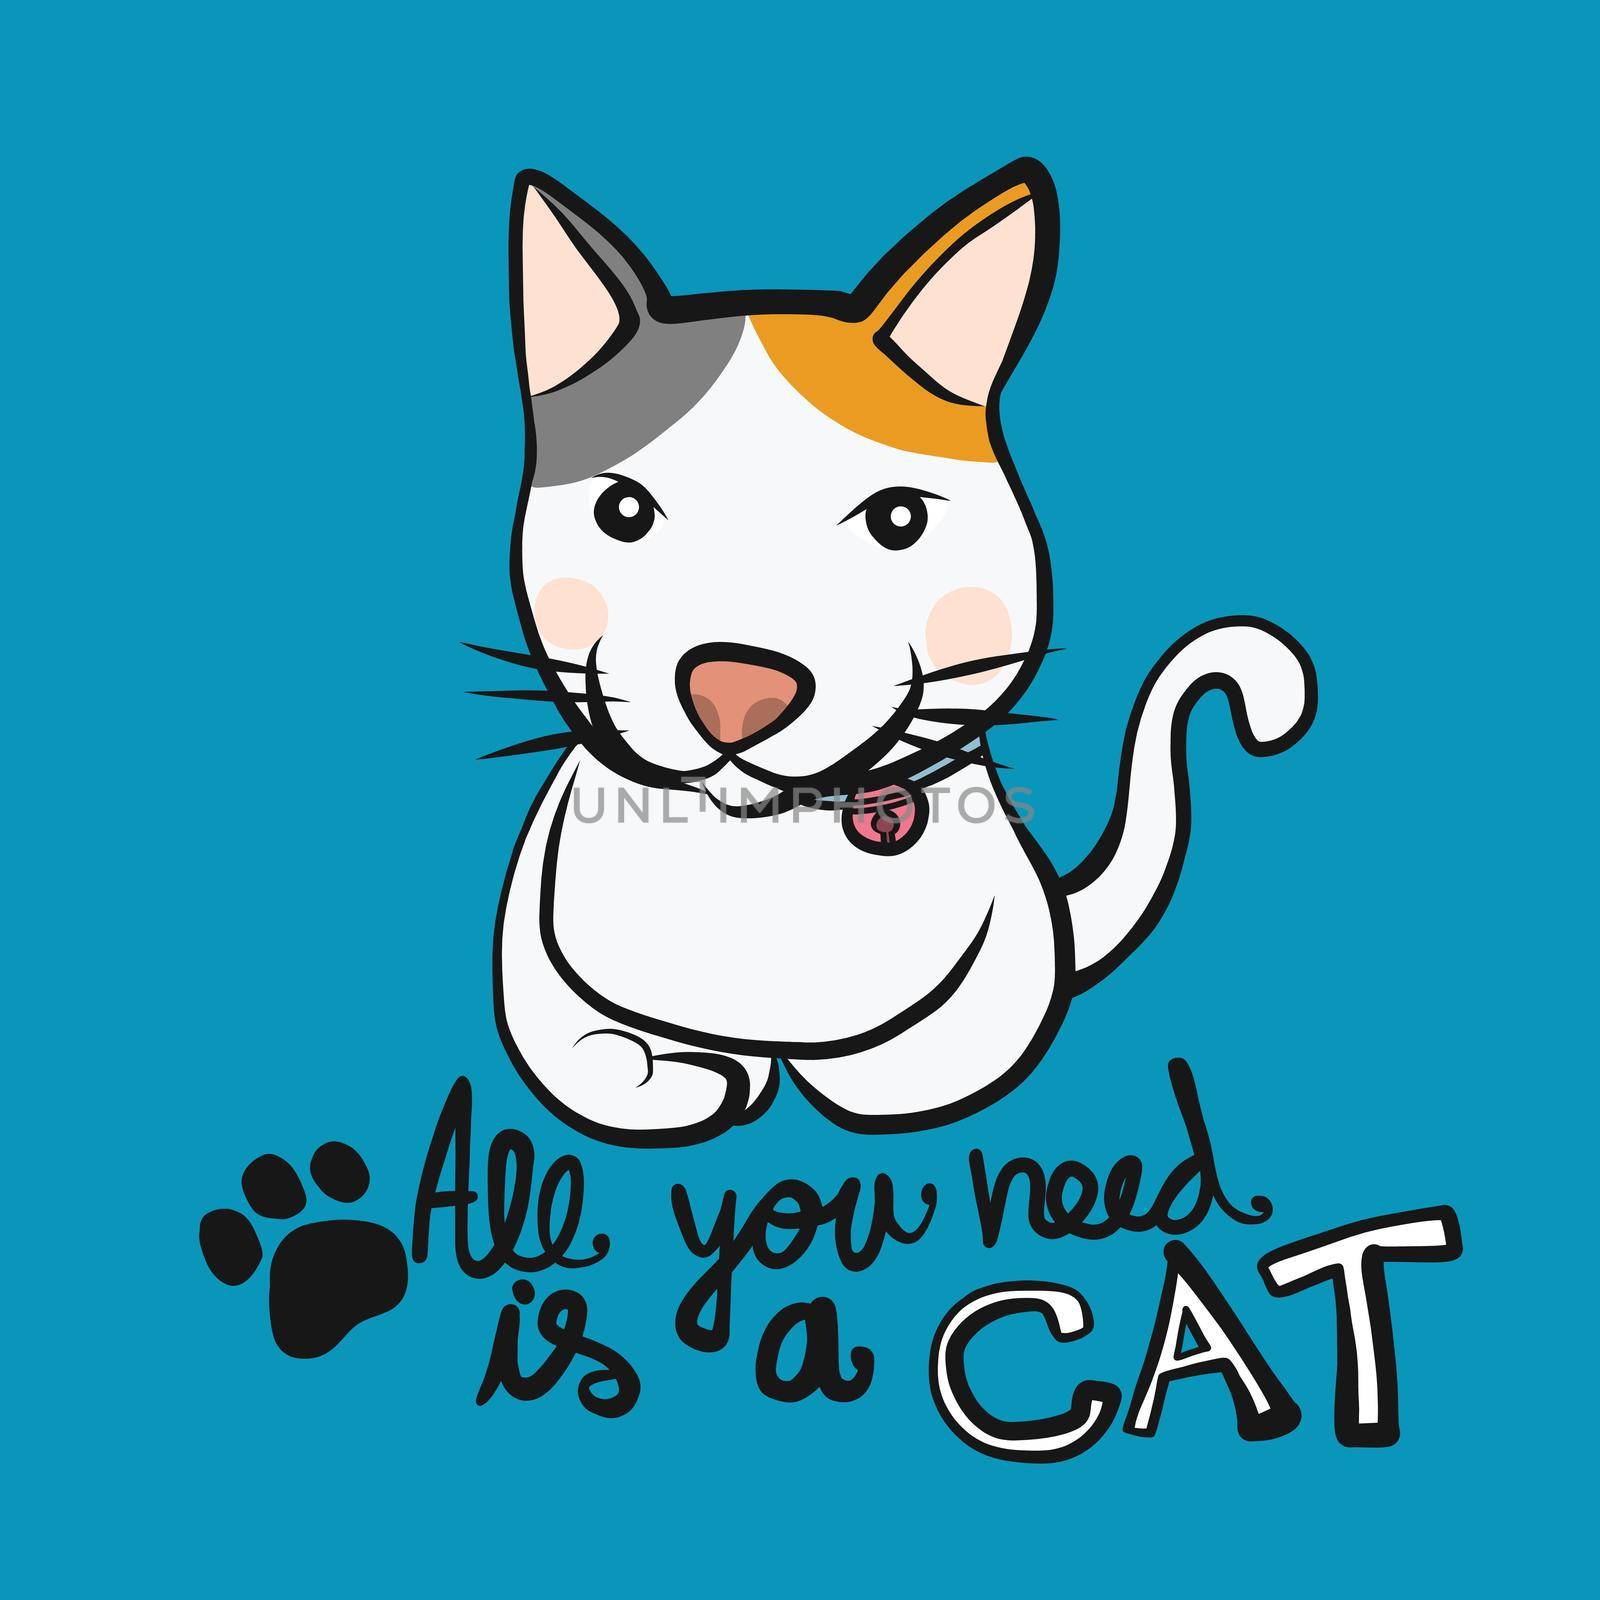 All you need is a cat cartoon vector illustration by Yoopho